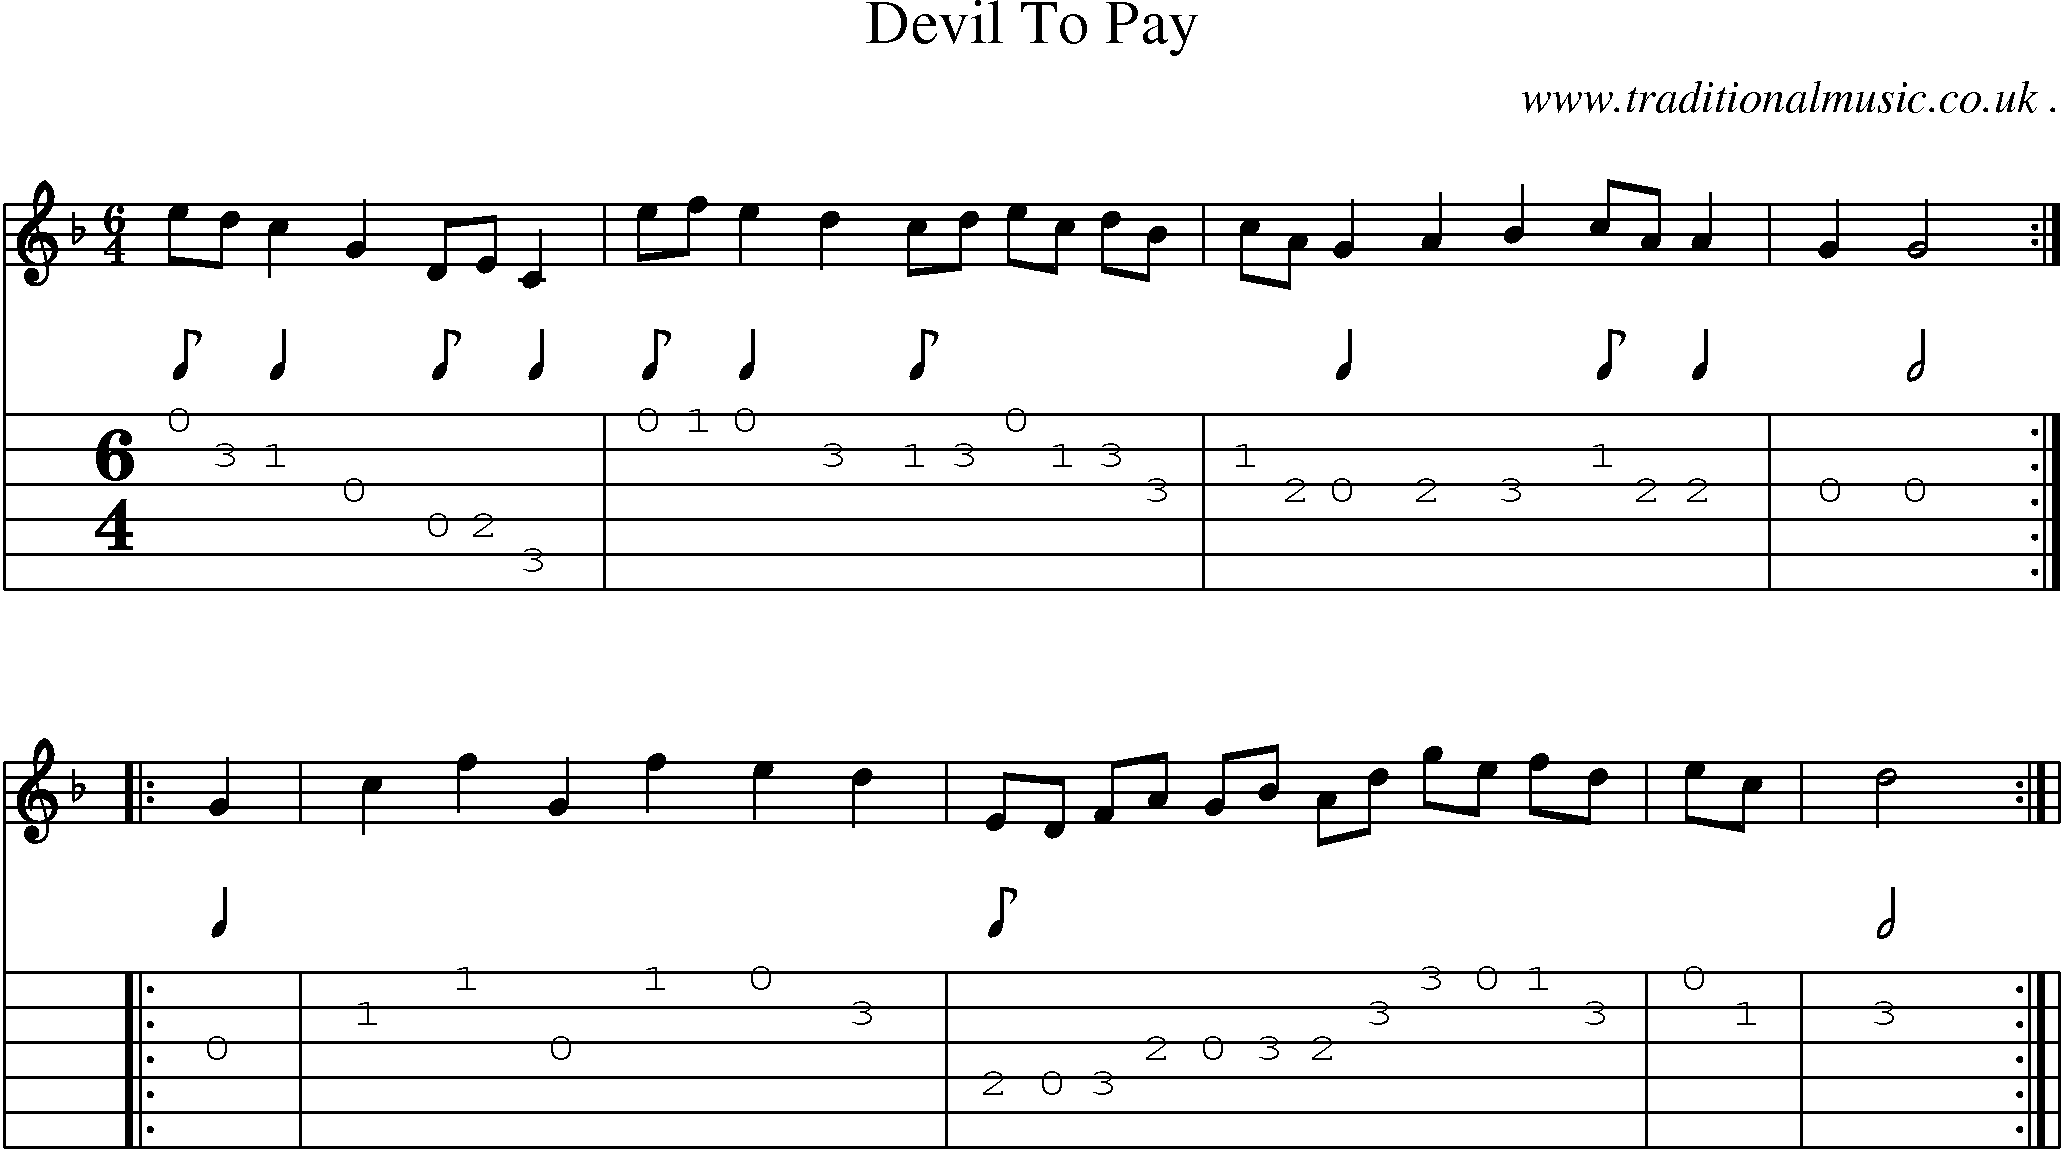 Sheet-Music and Guitar Tabs for Devil To Pay